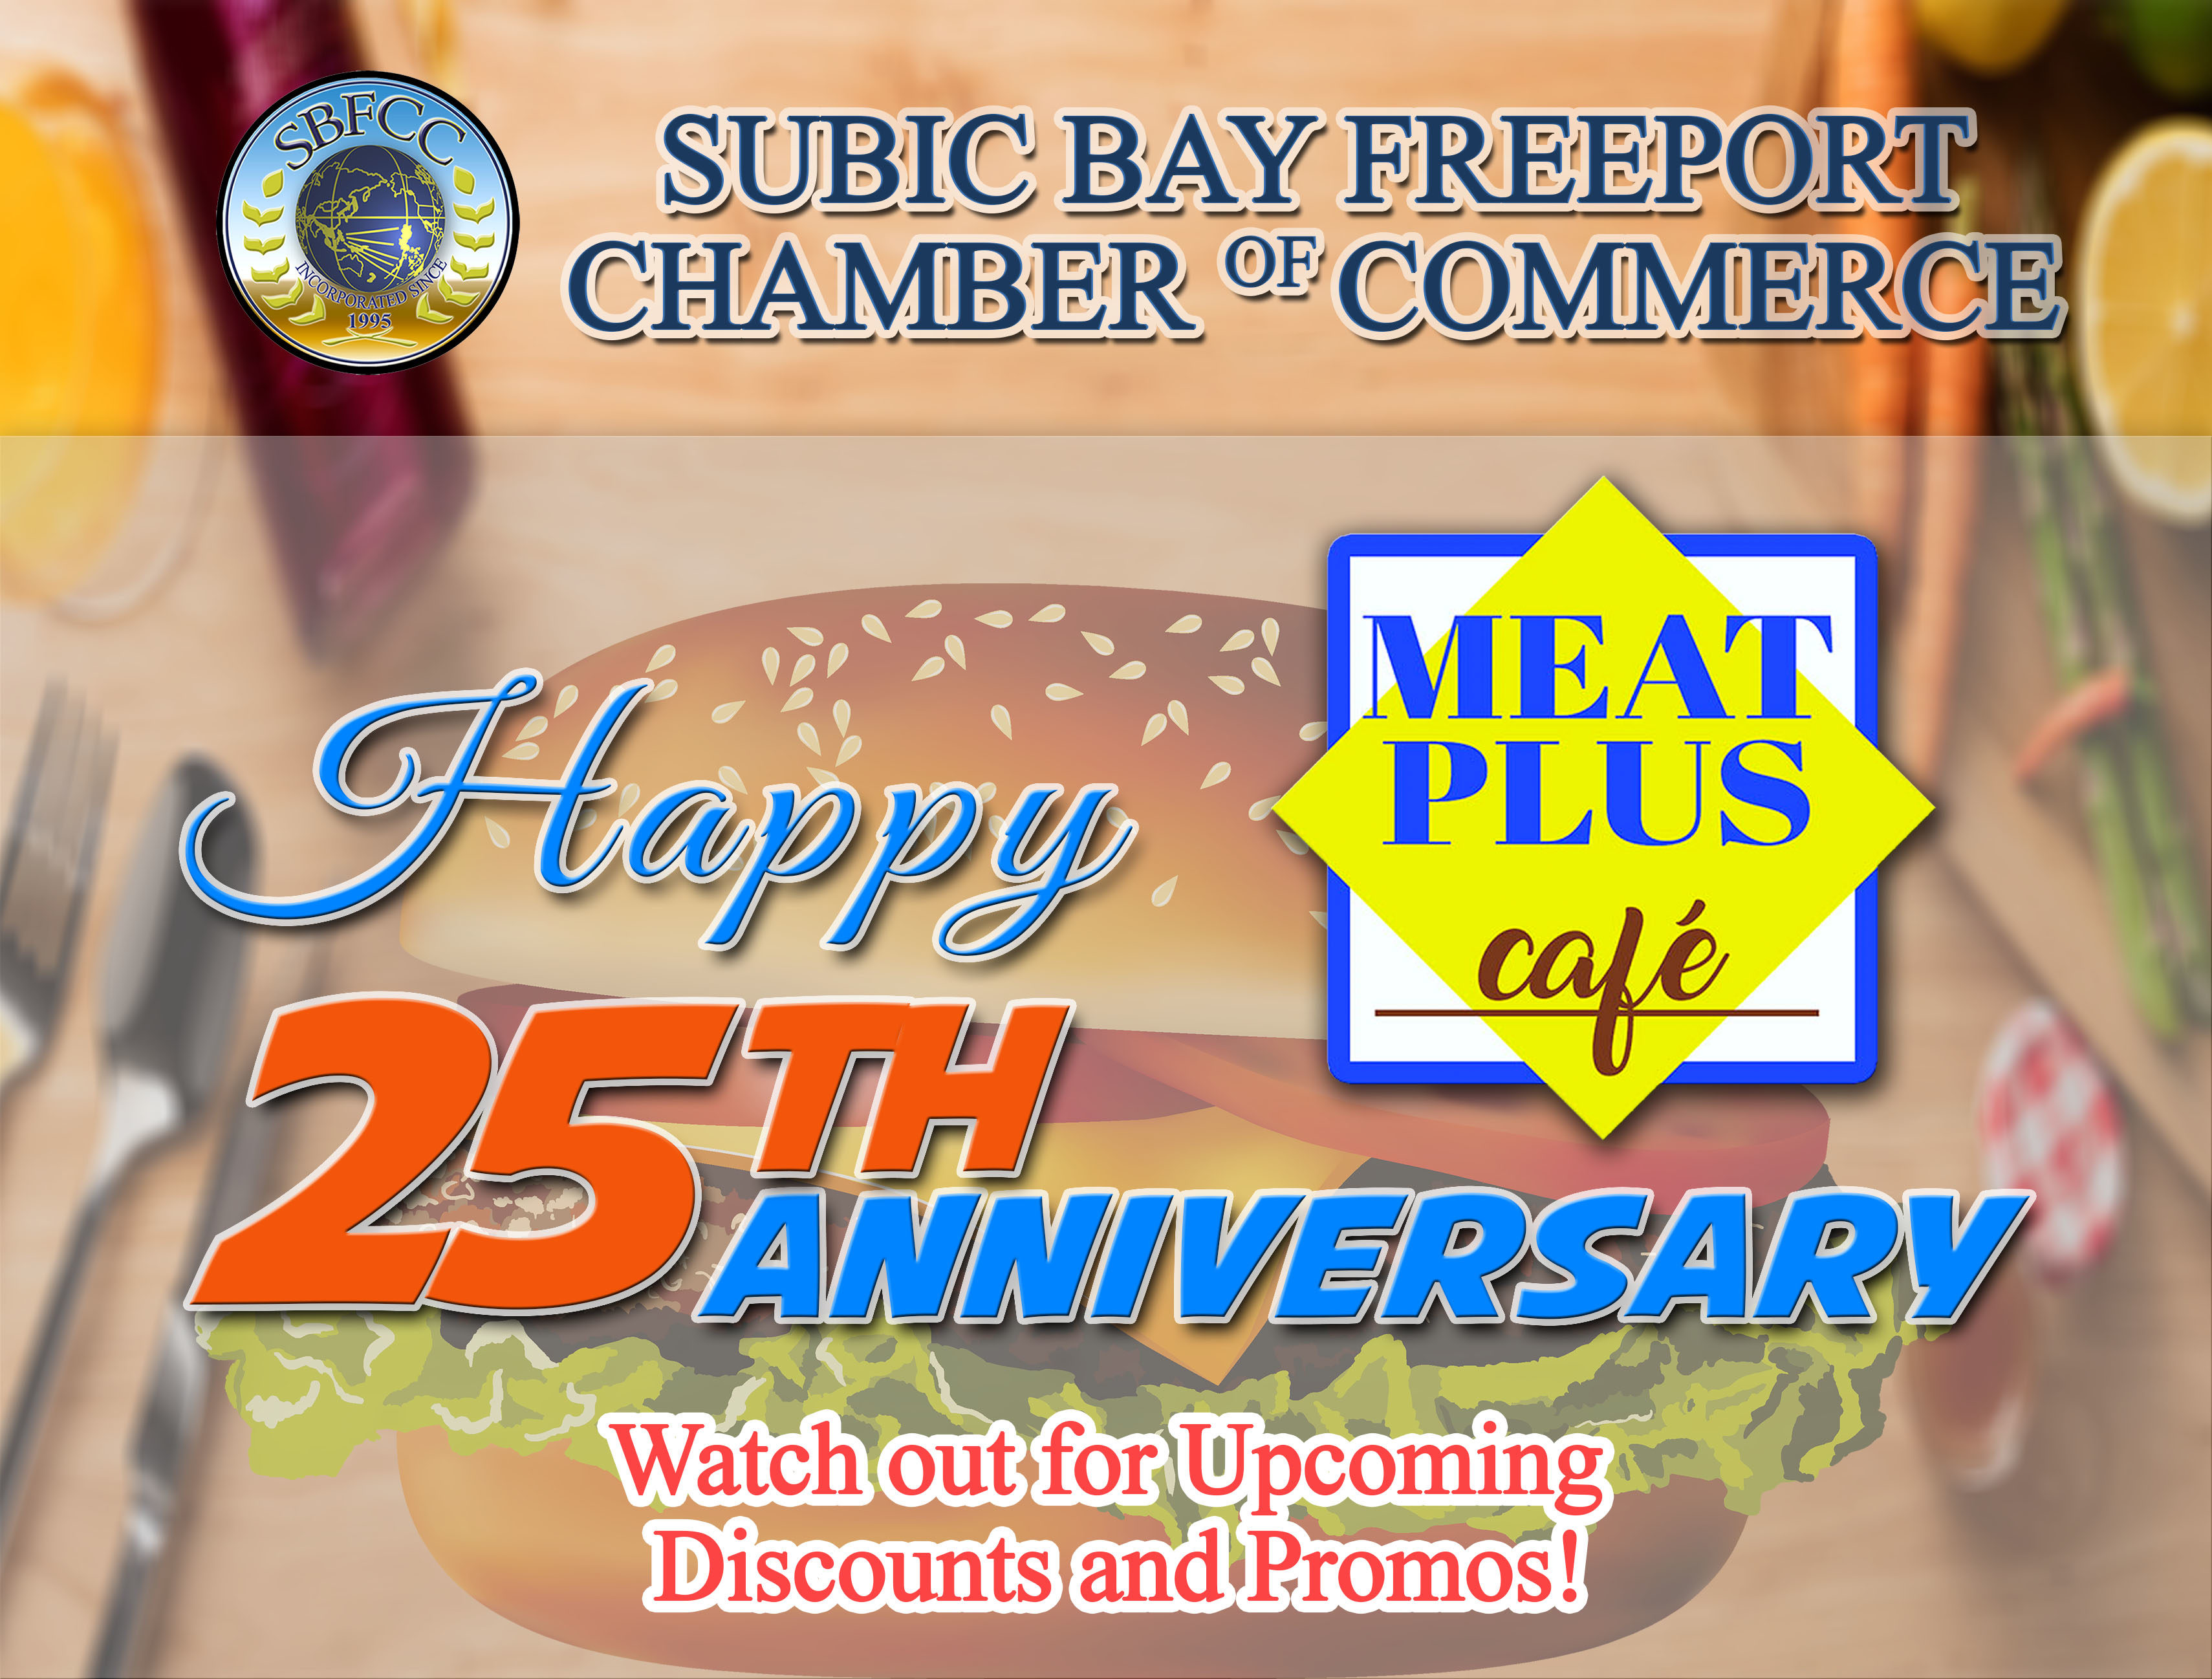 25th Anniversary of Meatplus – Subic Bay Freeport Chamber of Commerce